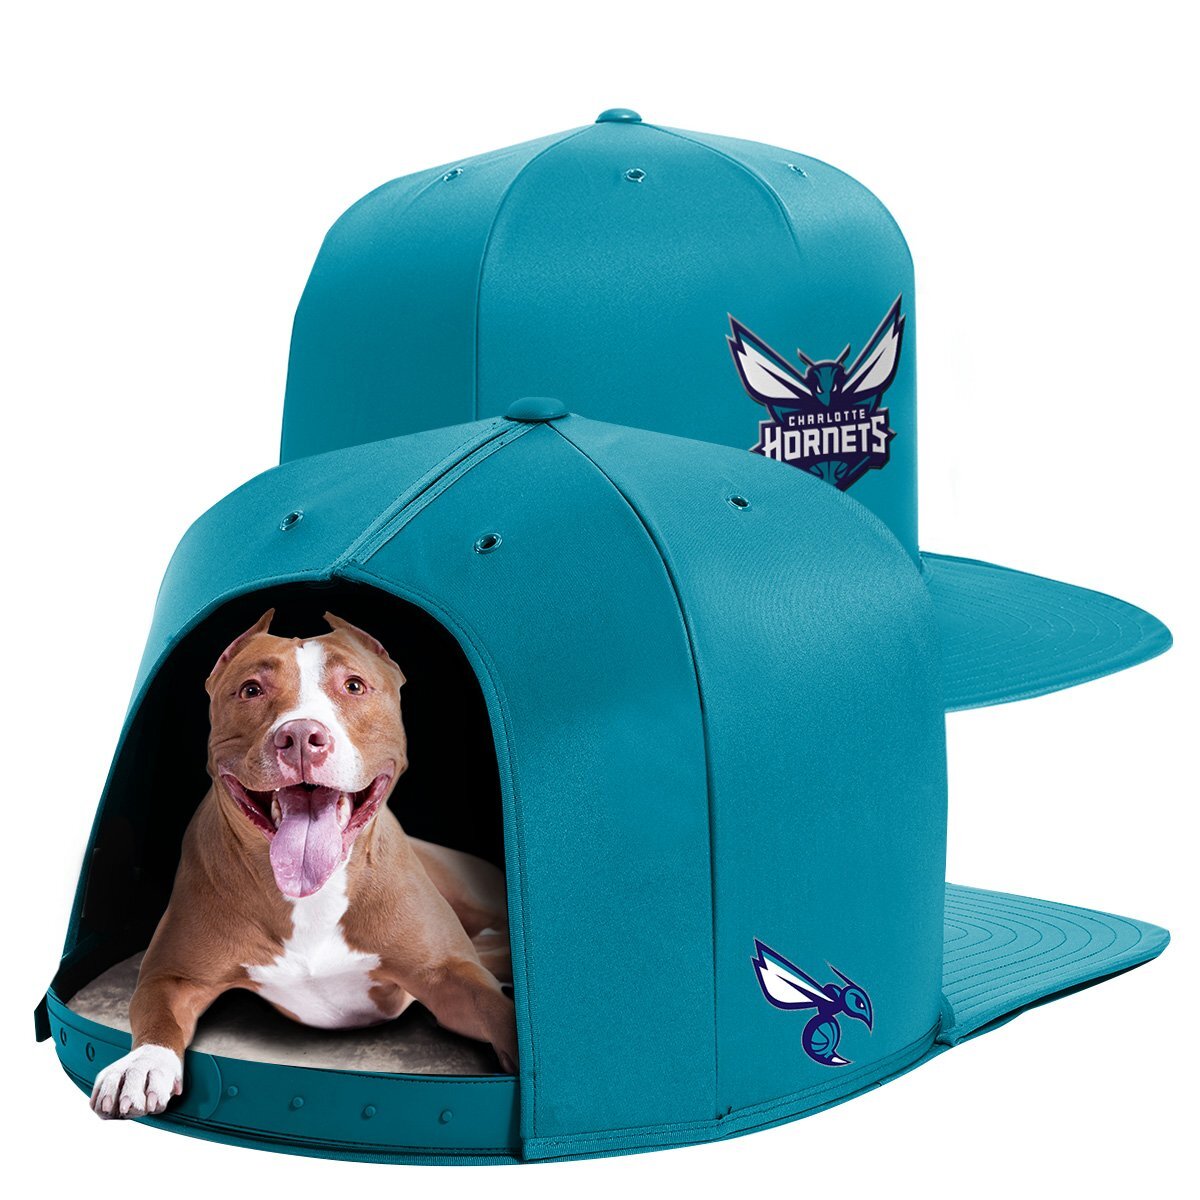   NAP CAP: Sports fans and pet lovers can unite over these sports hat dog beds made for small, medium and large dogs. You can choose from officially licensed designs from NBA, MLB, NHL and collegiate teams. $49.99-$119.99.    napcap.com.   